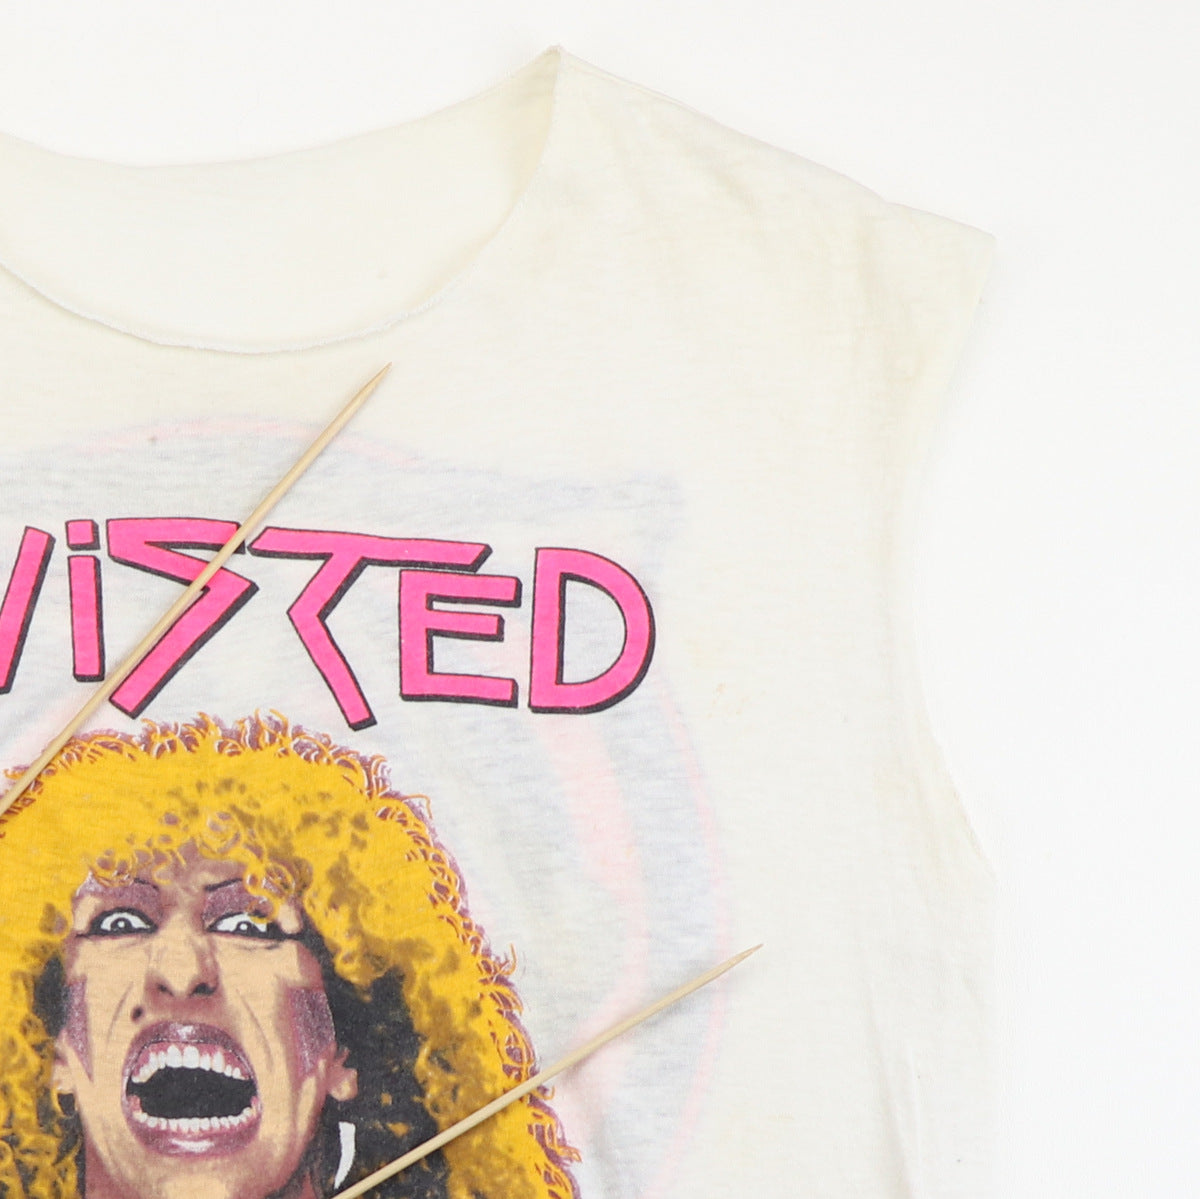 1980s Twisted Sister Shirt